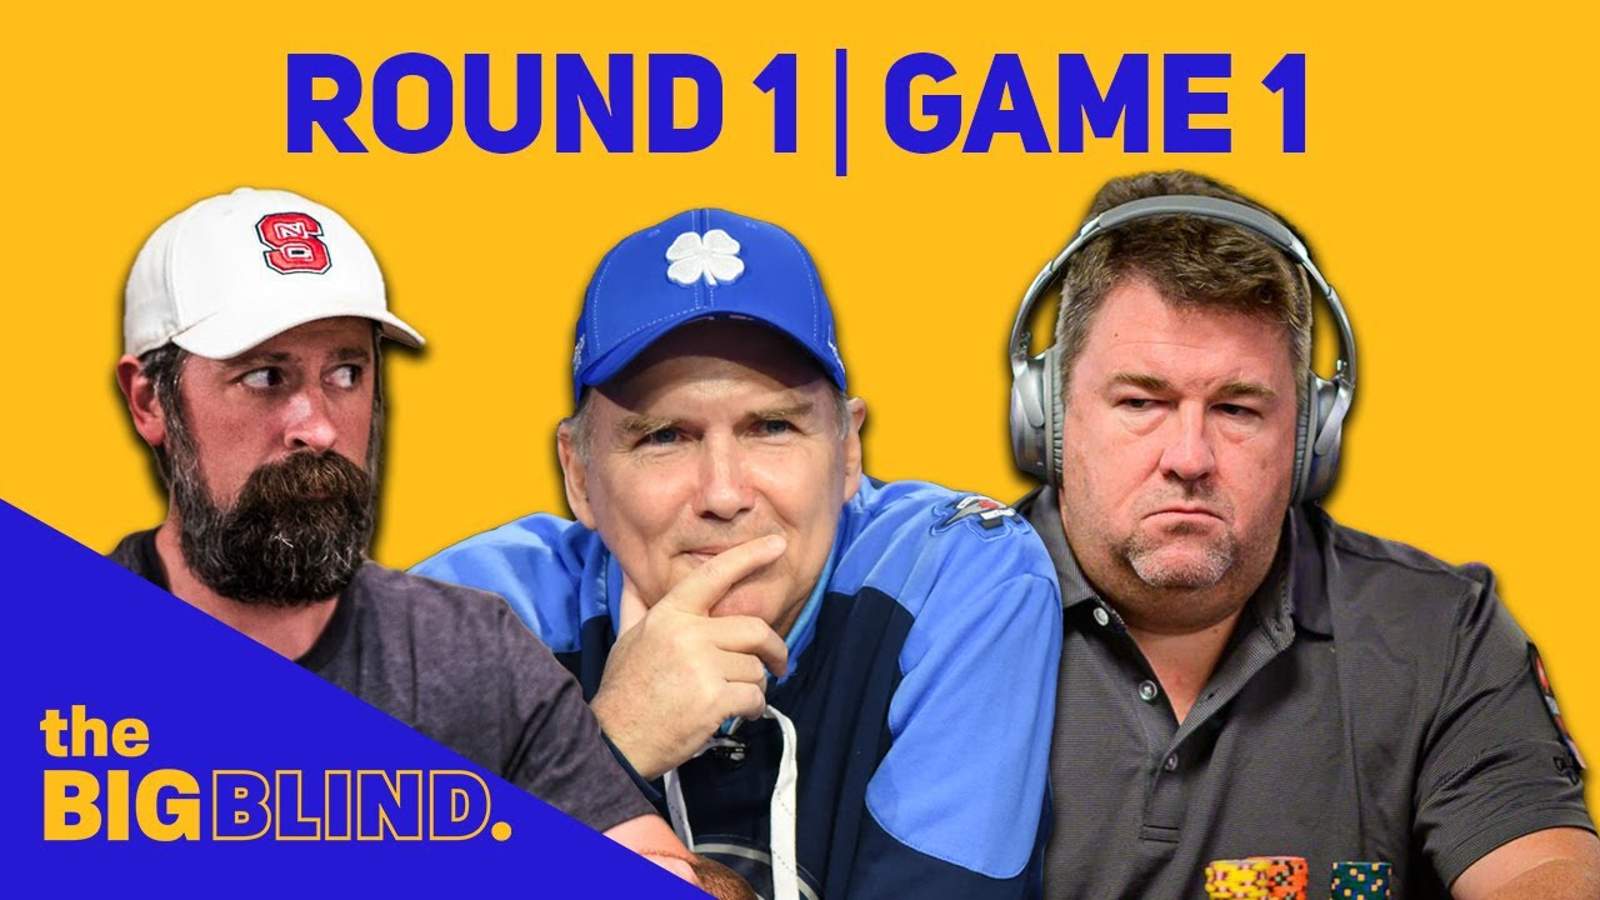 Rewatch Round 1 - Game 1 of The Big Blind on YouTube and Facebook